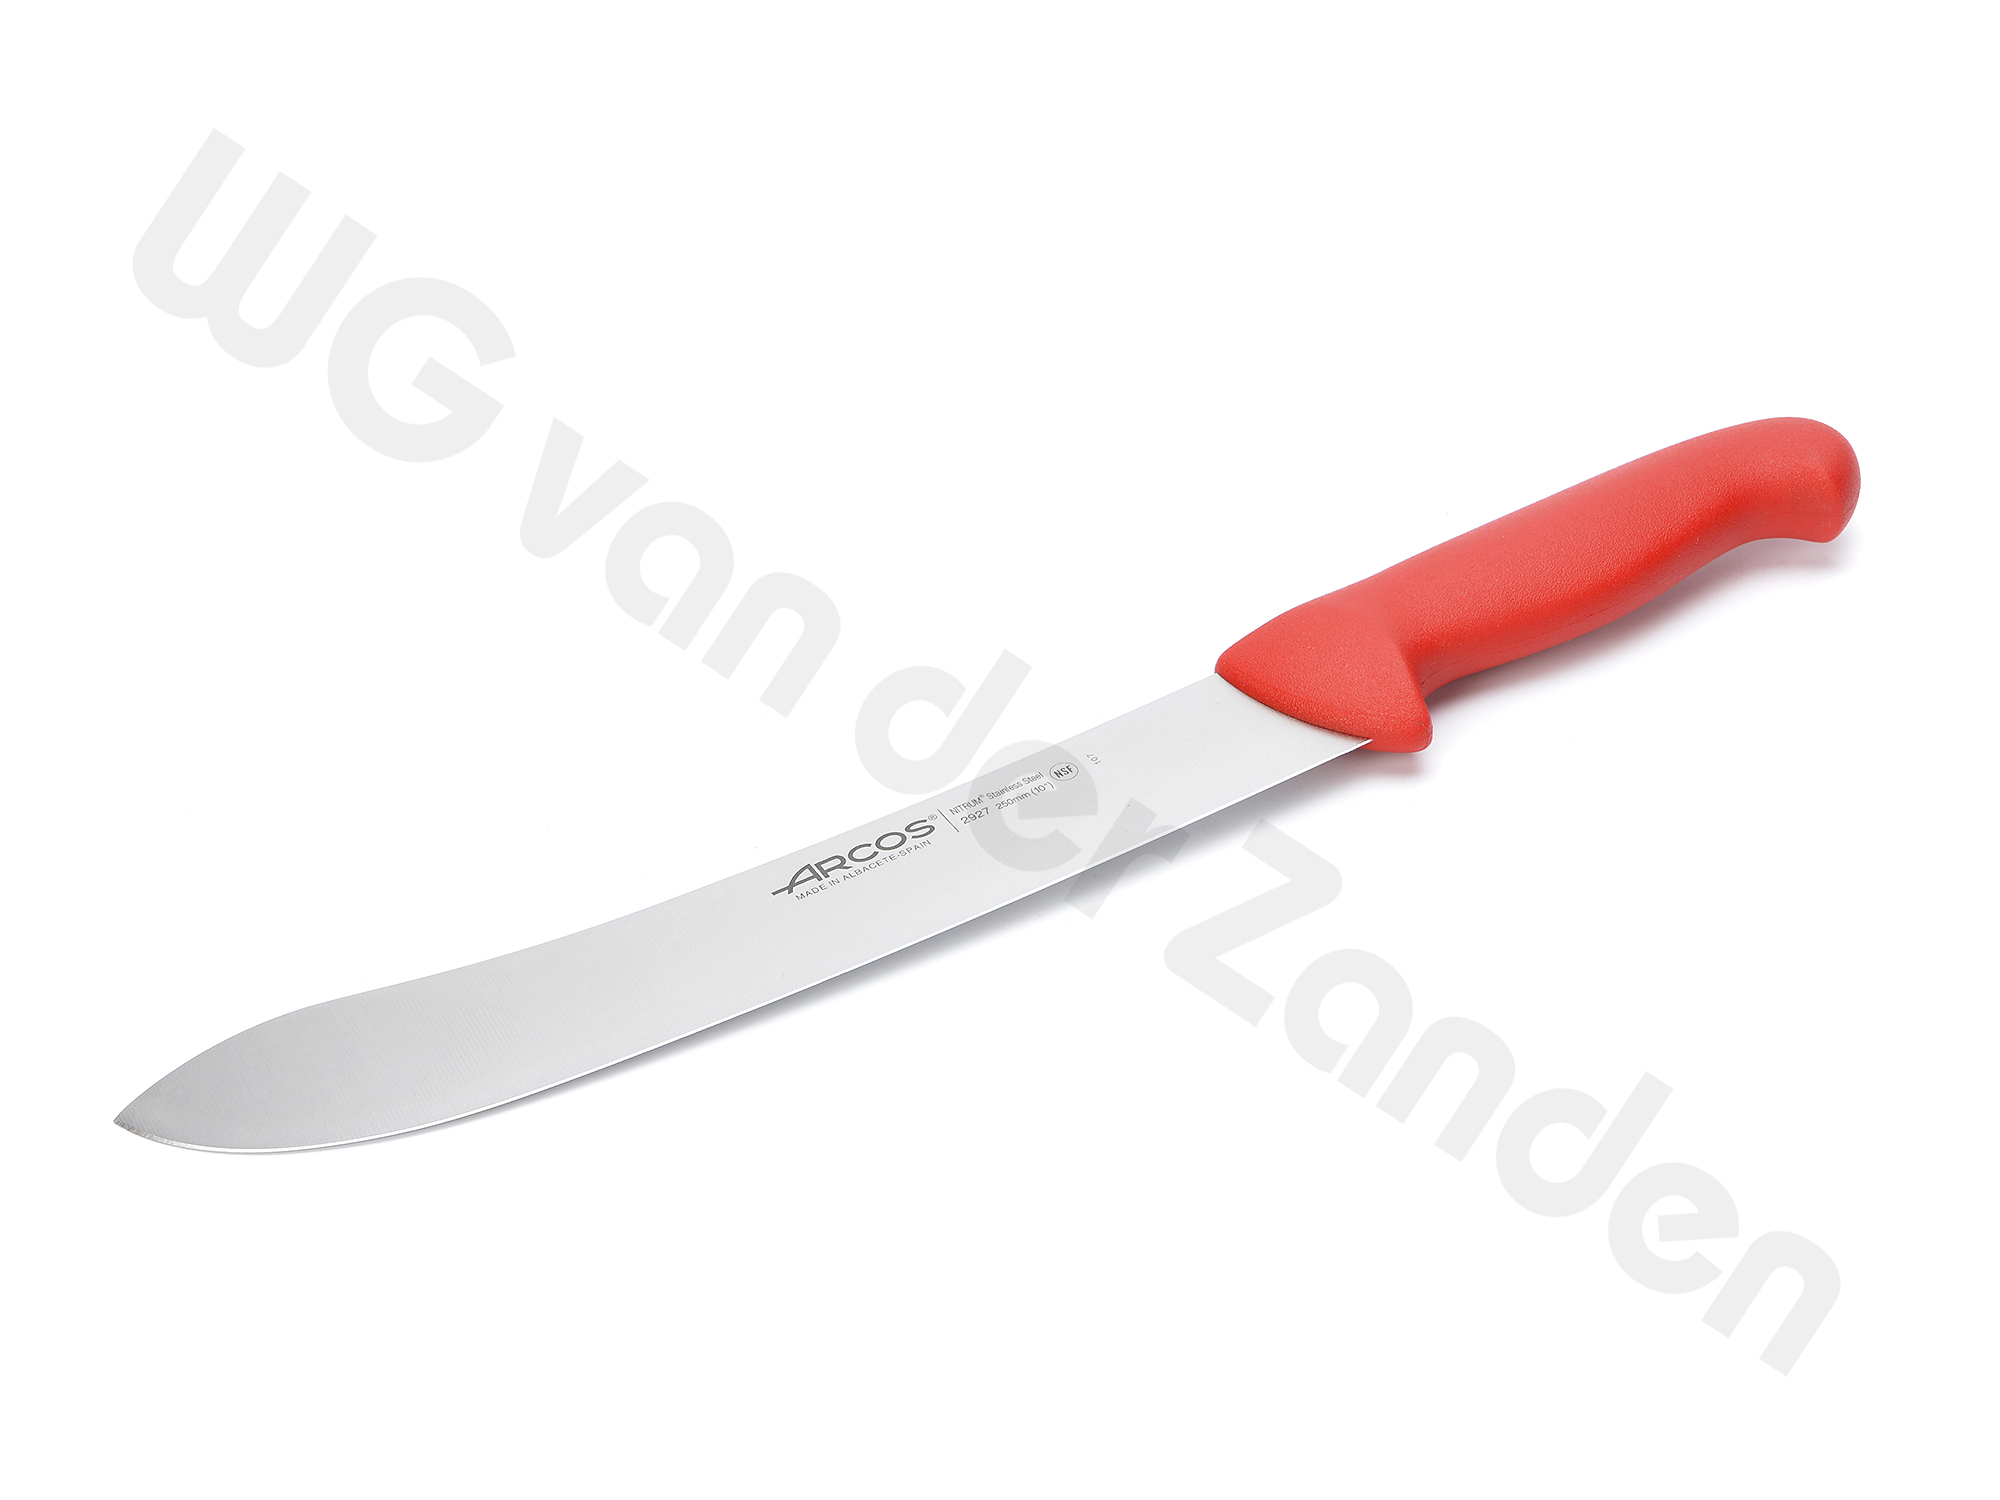 551560 BUTCHER KNIFE 30CM RED HANDLE ARCOS